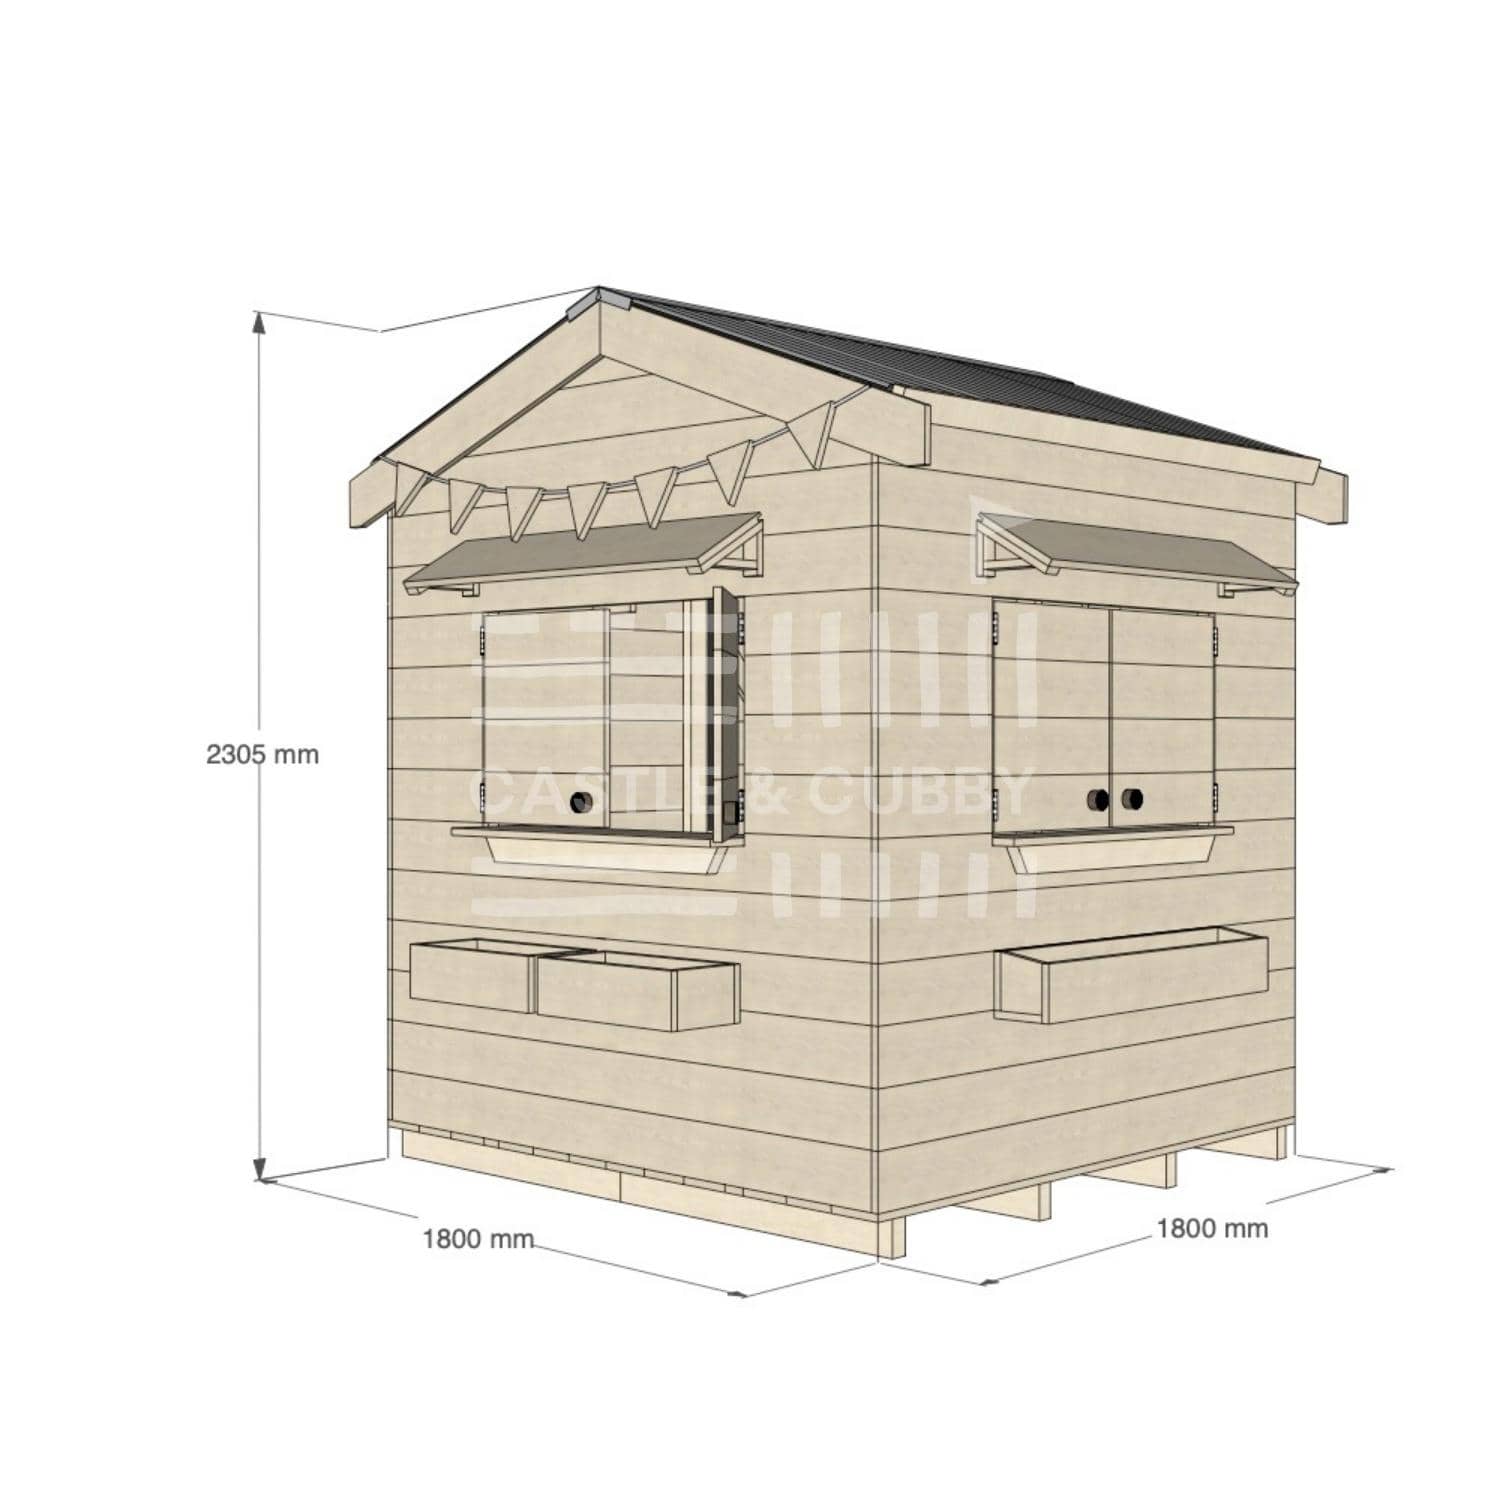 Pitched roof extra height raw wooden cubby house residential and family homes midi square dimensions